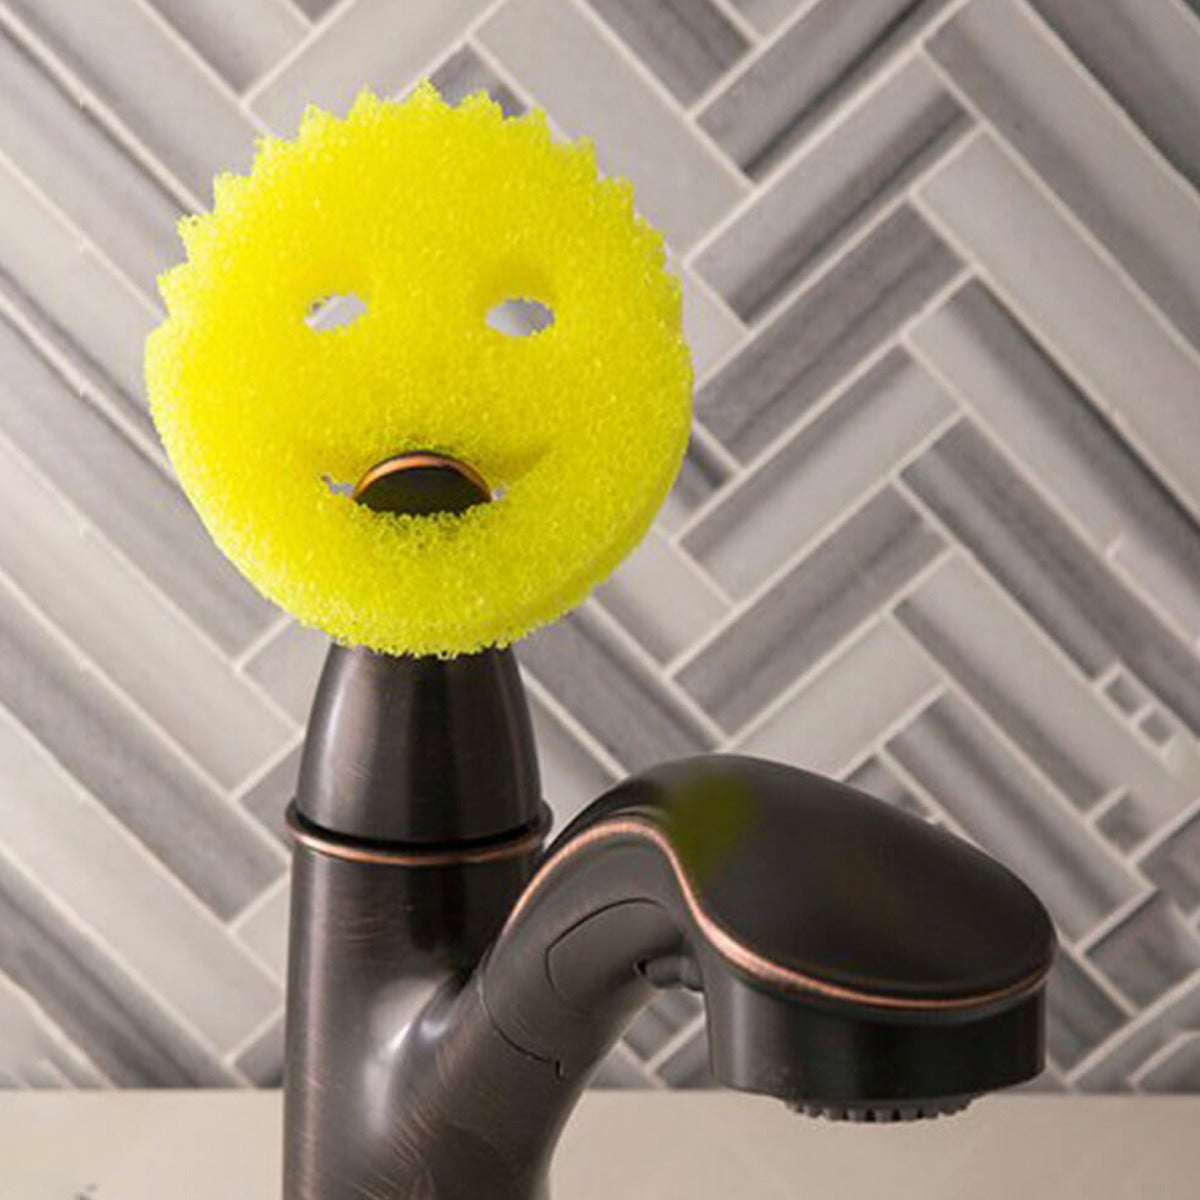 Smiley Face Kitchen Scrubber is Placed on a Water Pipe.